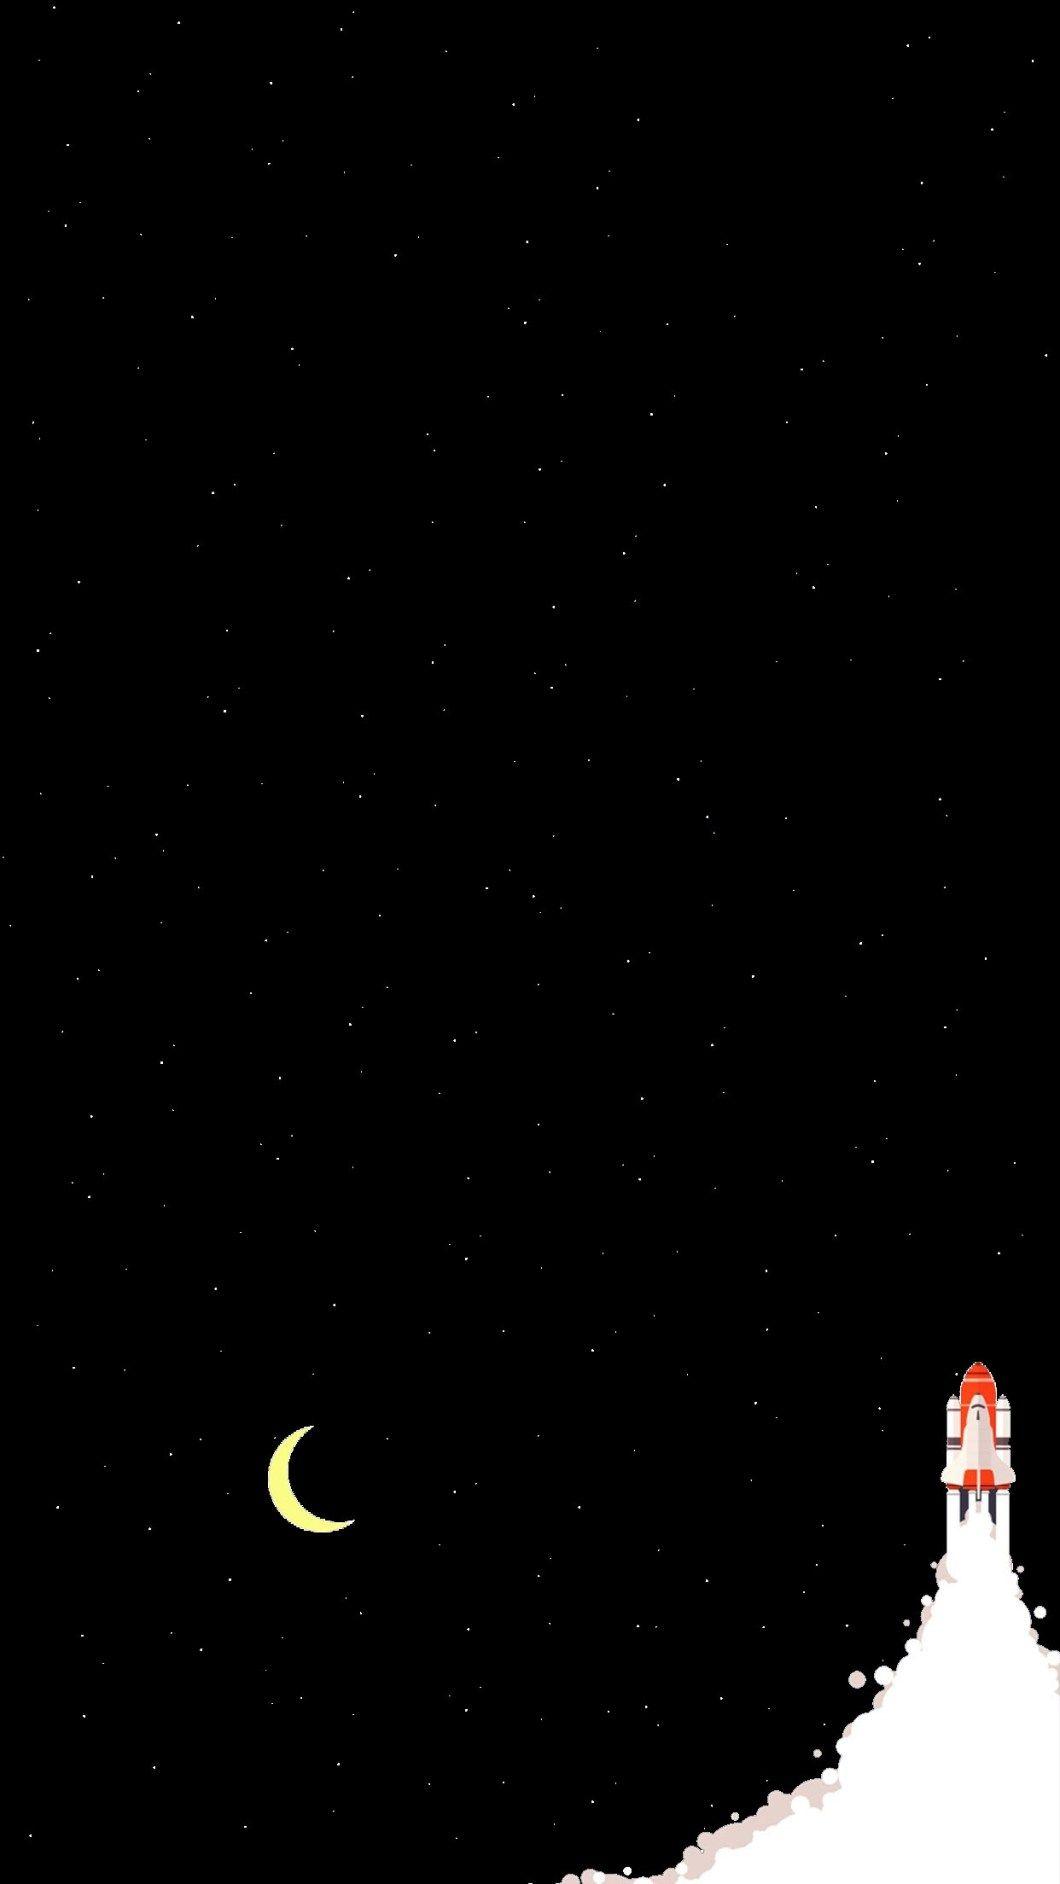 Cool Starry Night Space Rocket iPhone 6 Wallpaper. iPhone 6